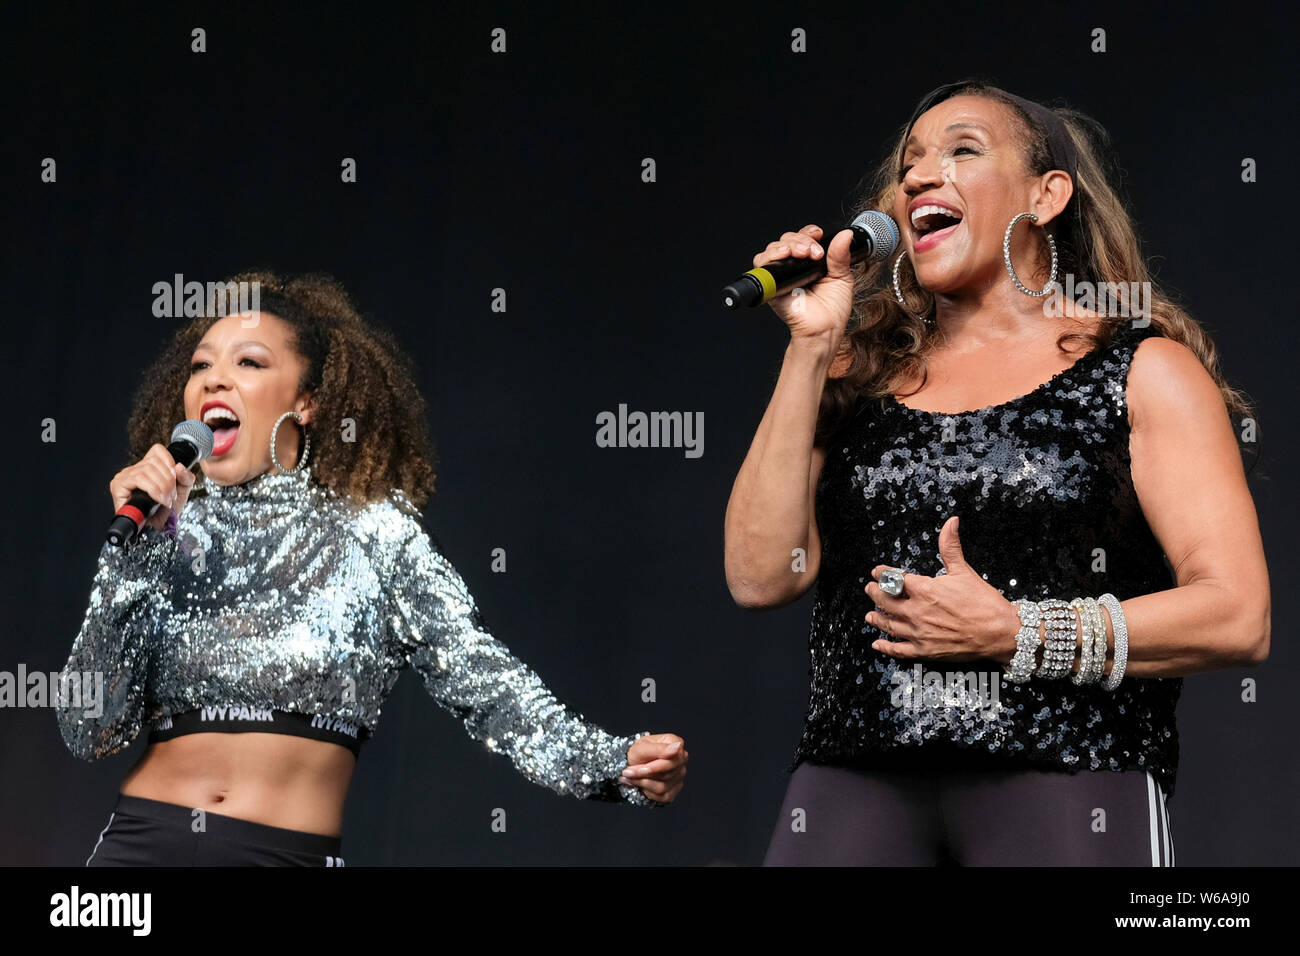 Lulworth, Dorset, UK. 28th July, 2019. Kathy Sledge, one of the original female vocalists with Grammy Award winning American musical vocal group Sister Sledge, performing live on stage with a backing vocalist at Camp Bestival family music festival in Lulworth, Dorset, UK Credit: Dawn Fletcher-Park/SOPA Images/ZUMA Wire/Alamy Live News Stock Photo